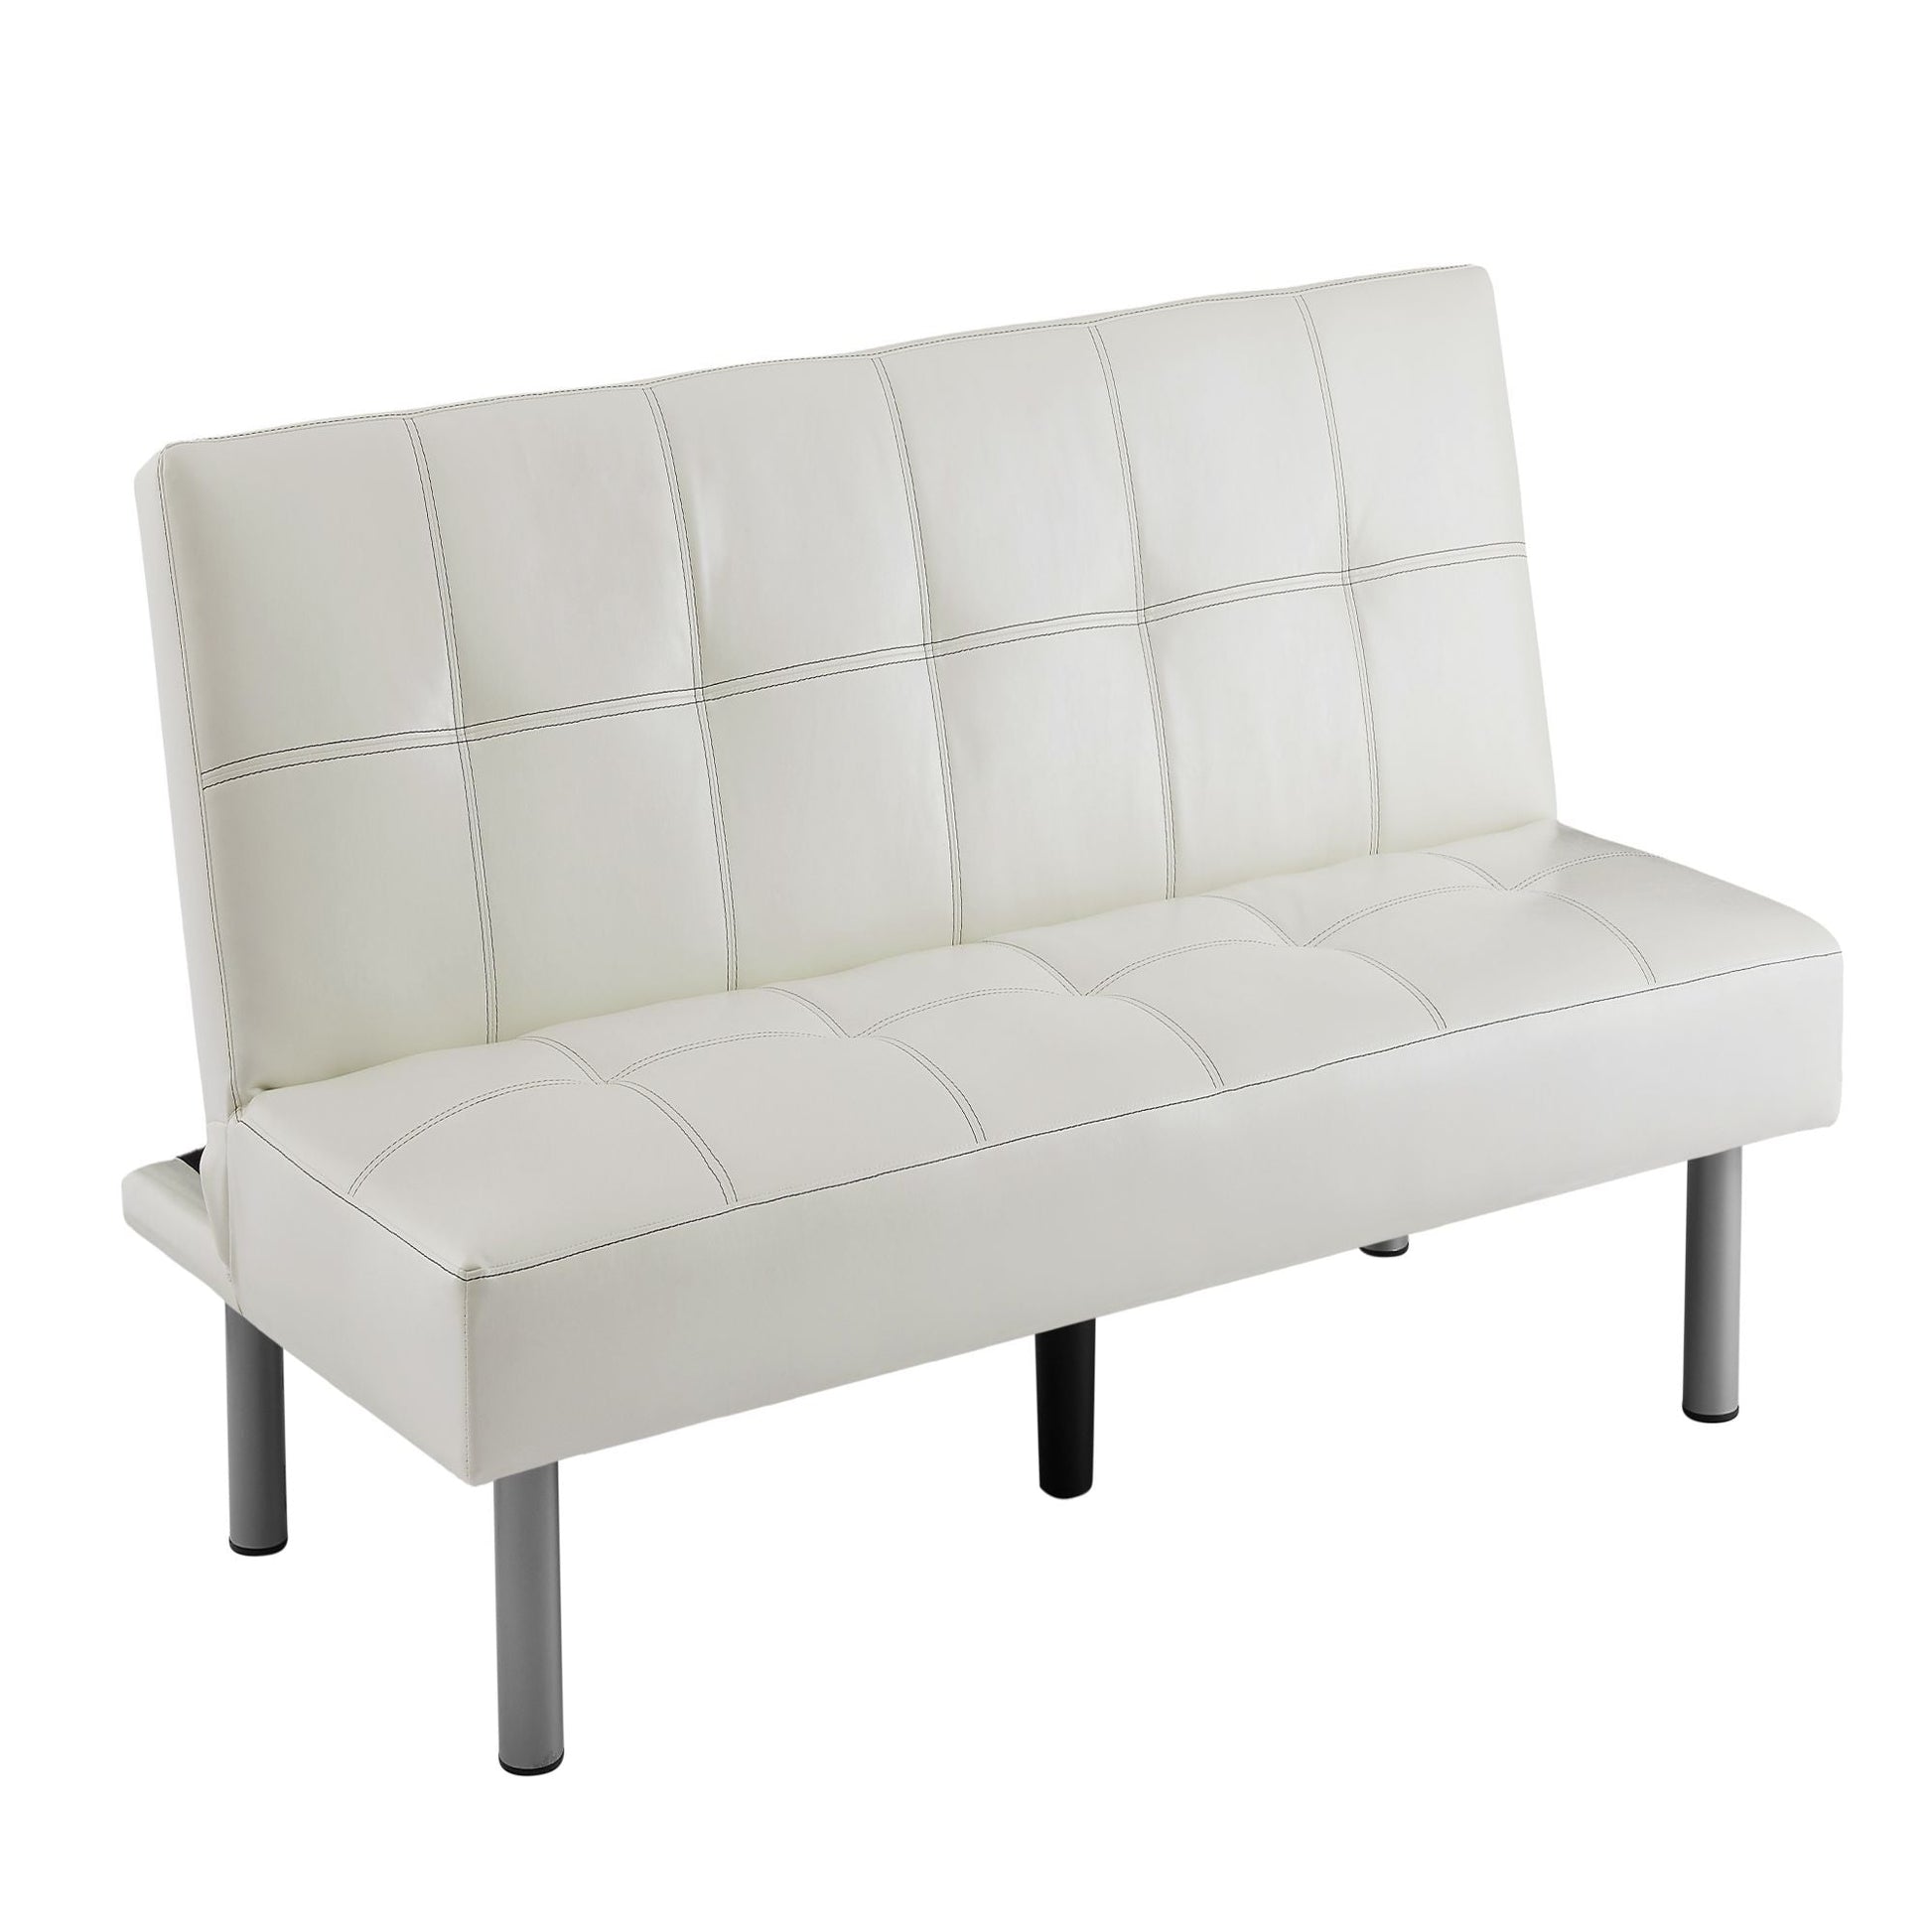 Three-person foldable sofa bed, PU leather, solid wood frame, and metal foot support， Can be laid flat as a bed.